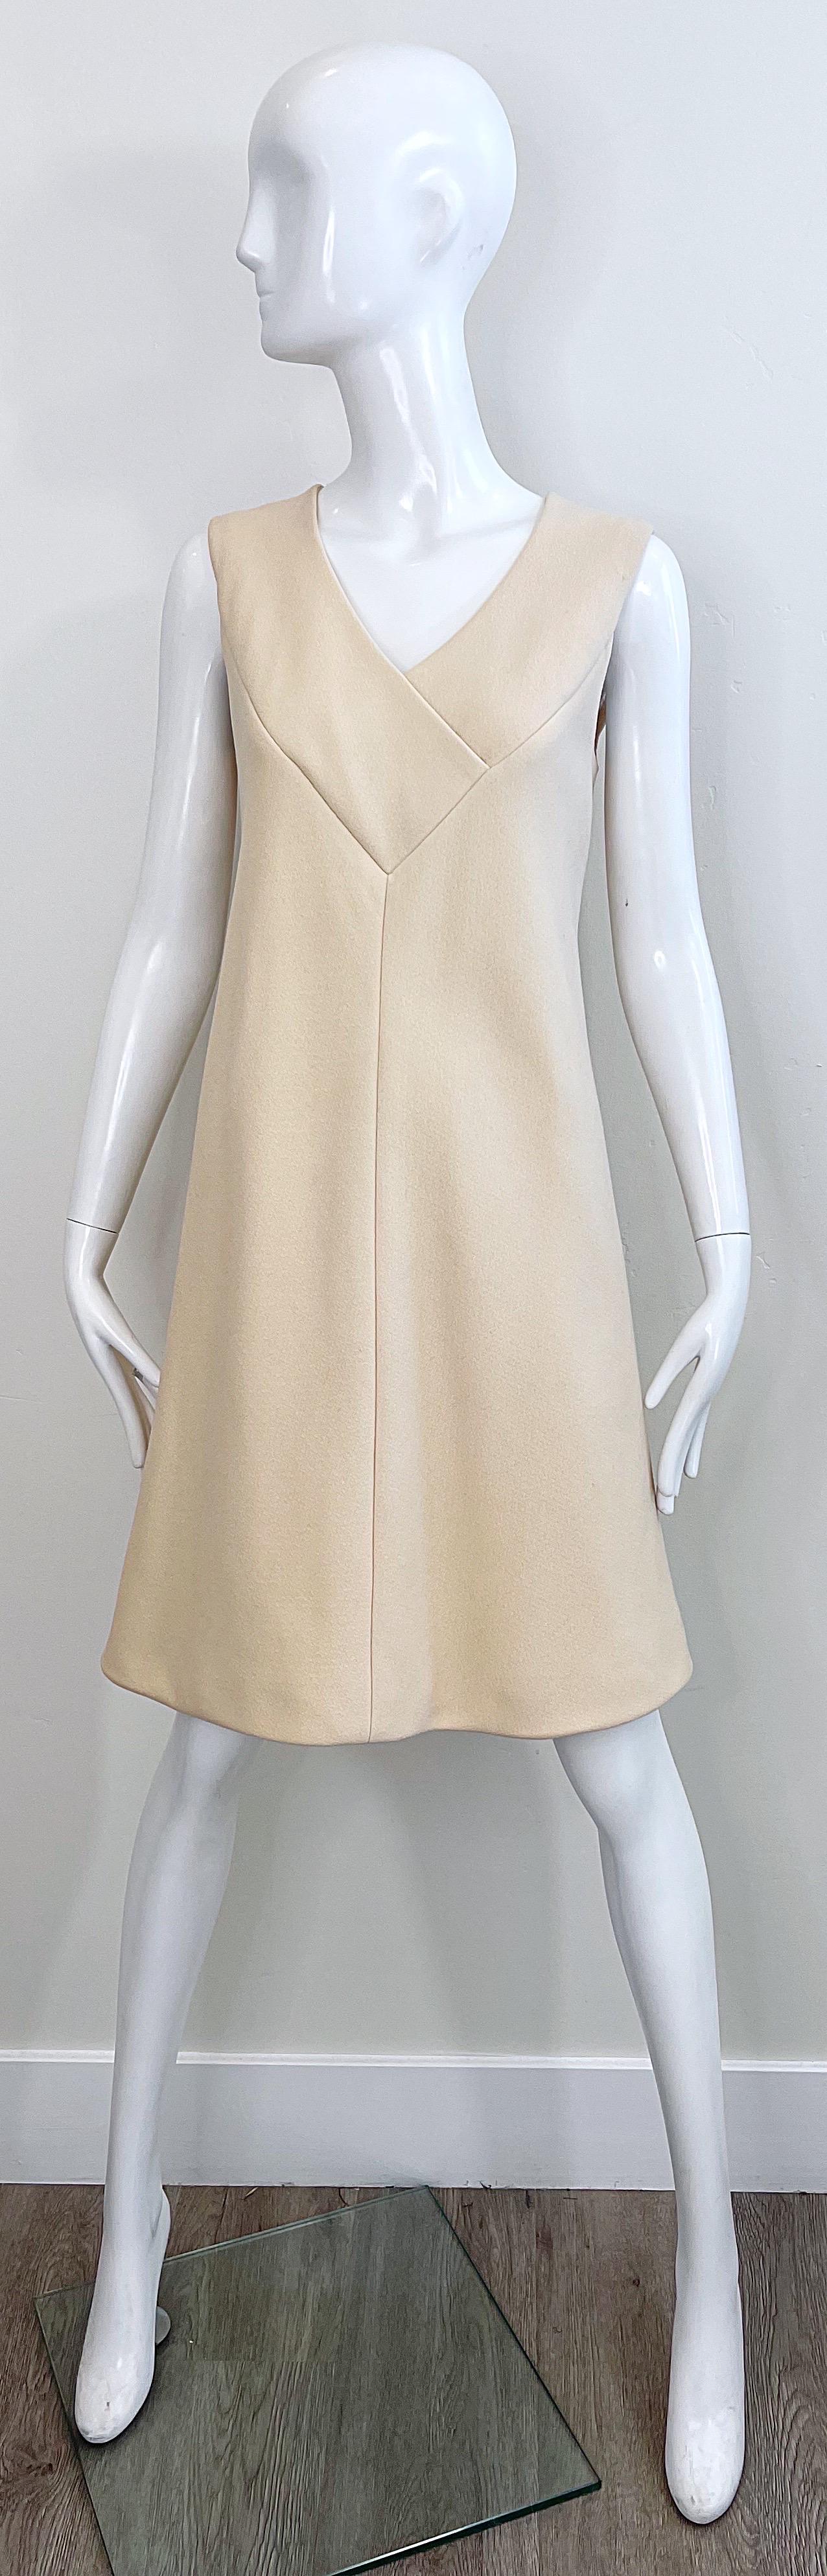 Chic 1960s PAULINE TIRGERE off-white / ivory sleeveless A-line wool dress ! Features a v-neck with a tailored bodice and slightly flared skirt. Hidden metal zipper up the back with hook-and-eye closure. Fully lined in silk. 
Very well made with lots